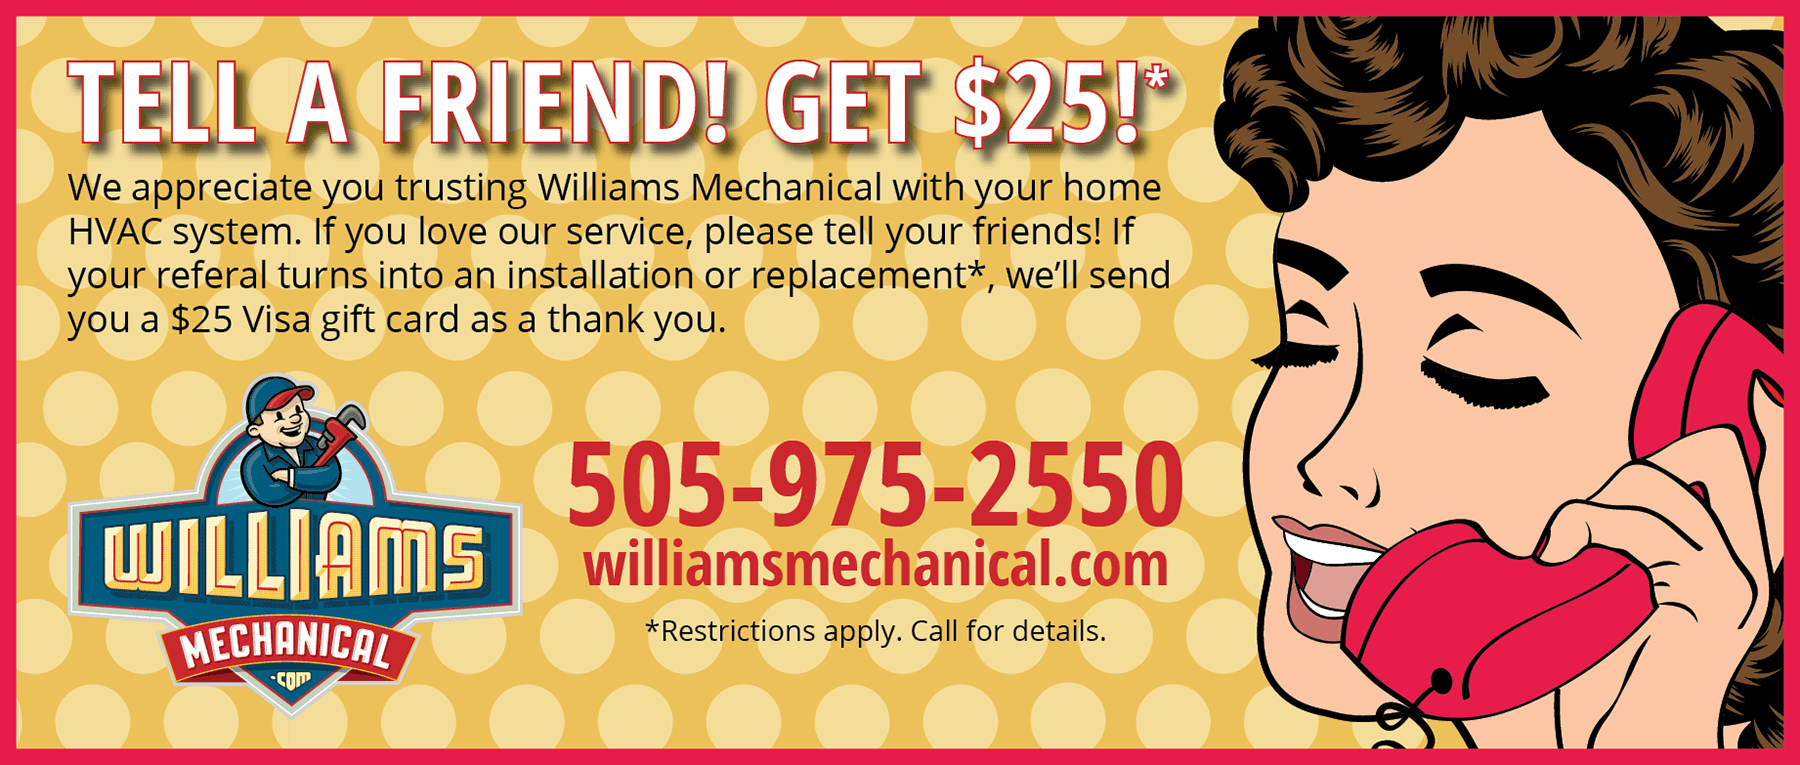 Williams Mechanical Referral Coupon.